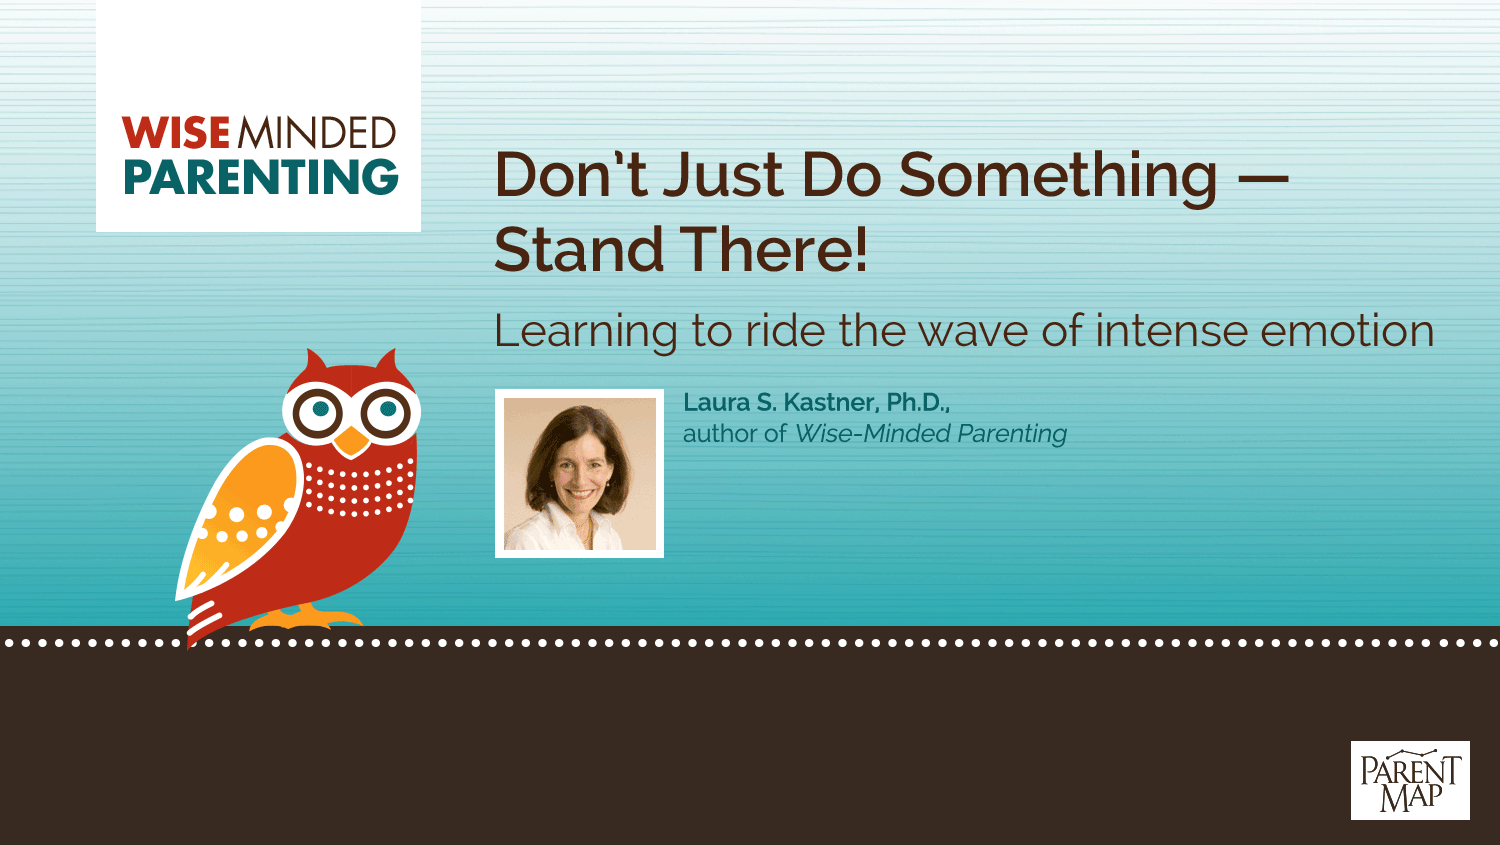 Don’t Just Do Something — Stand There!